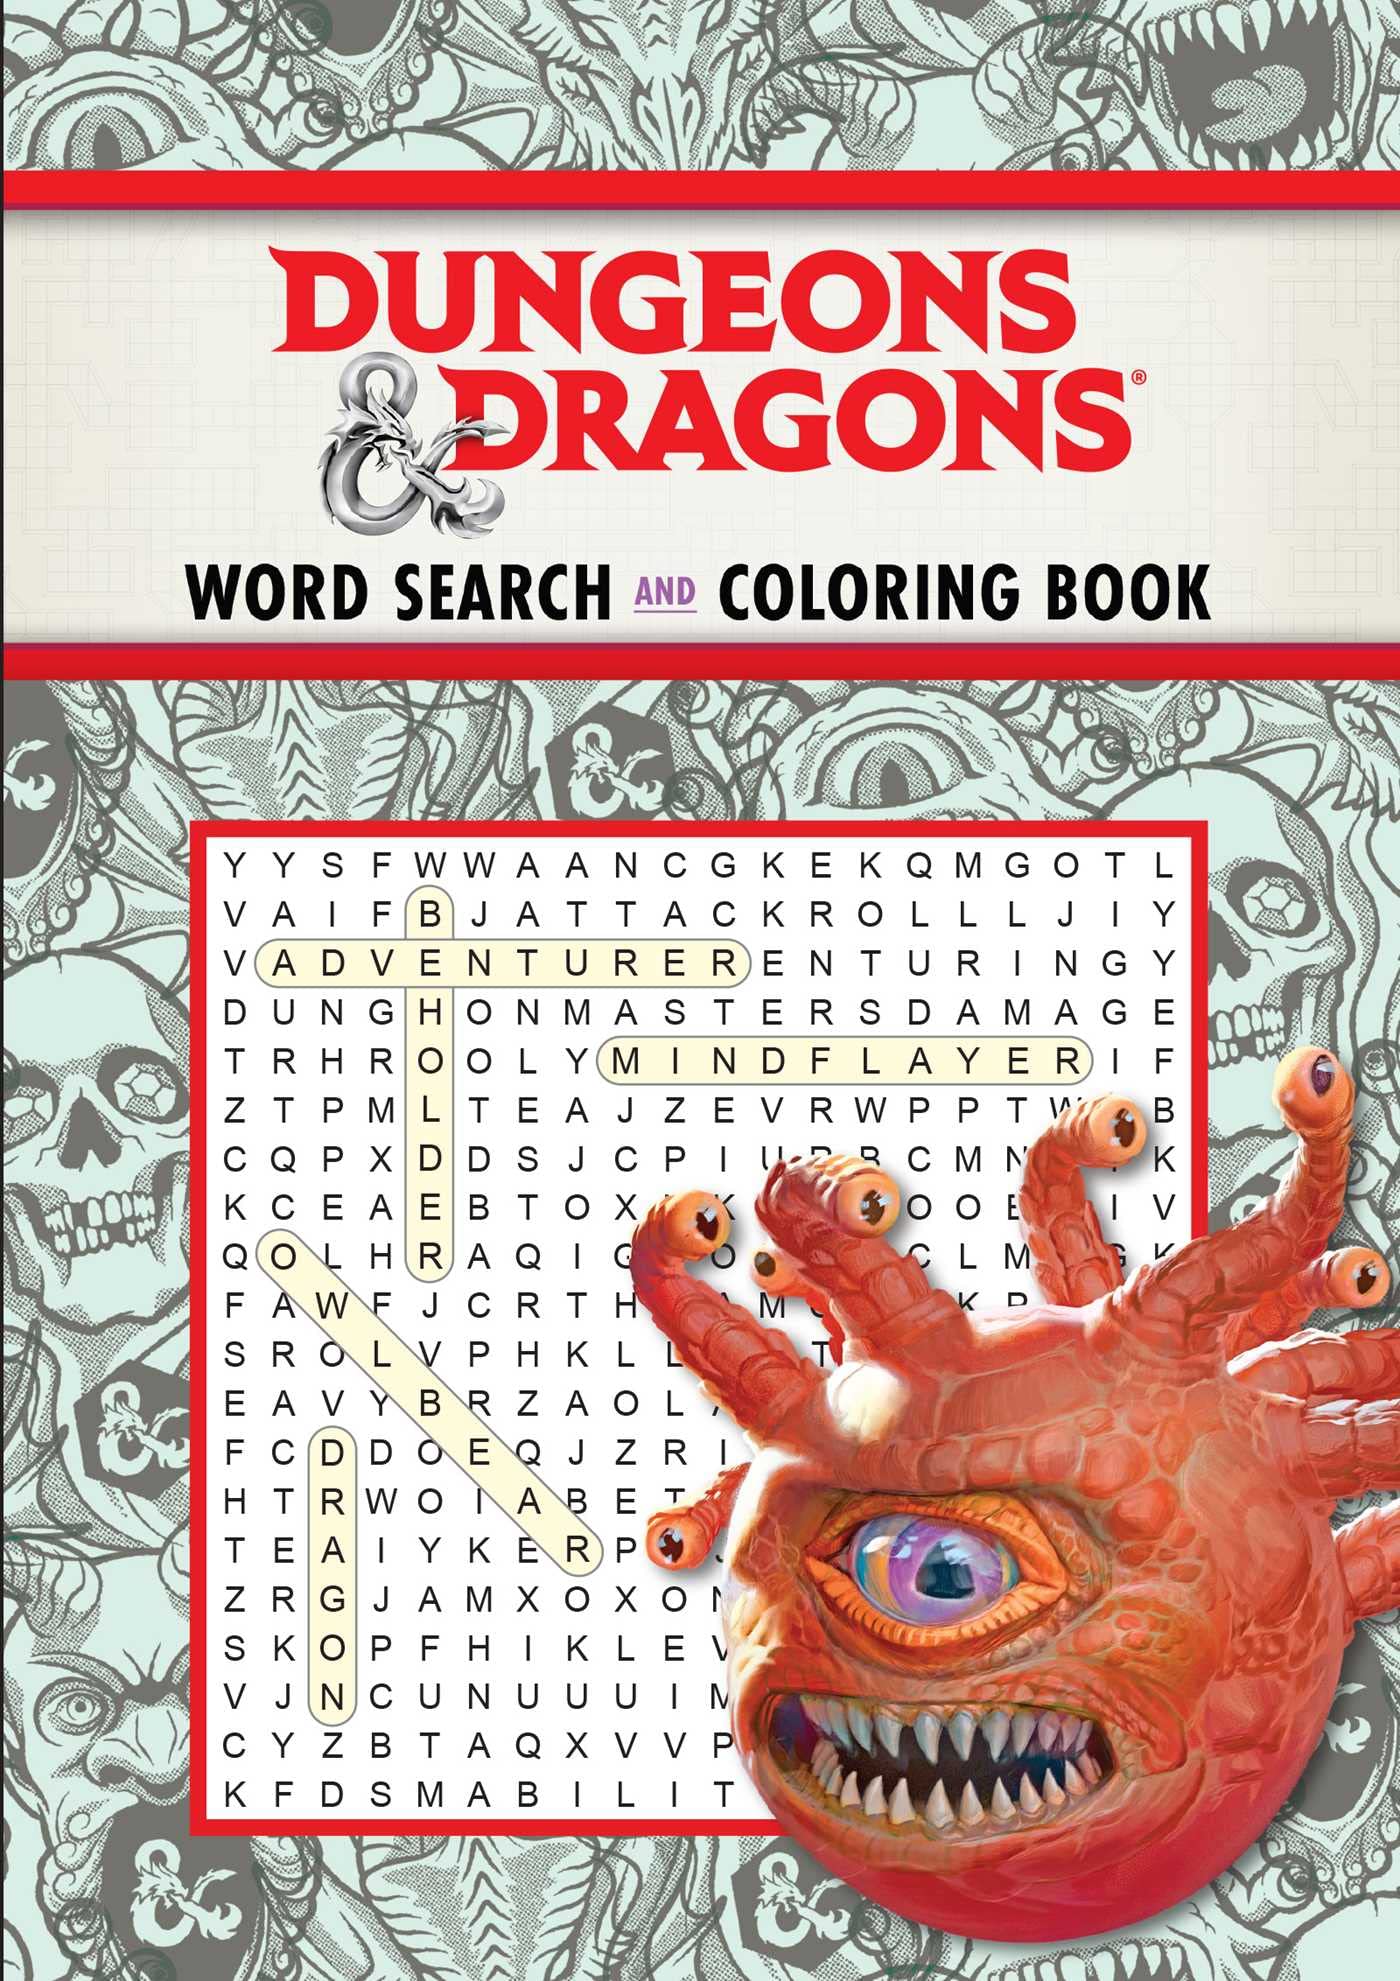 Dungeons & Dragons Word Search and Colouring book cover